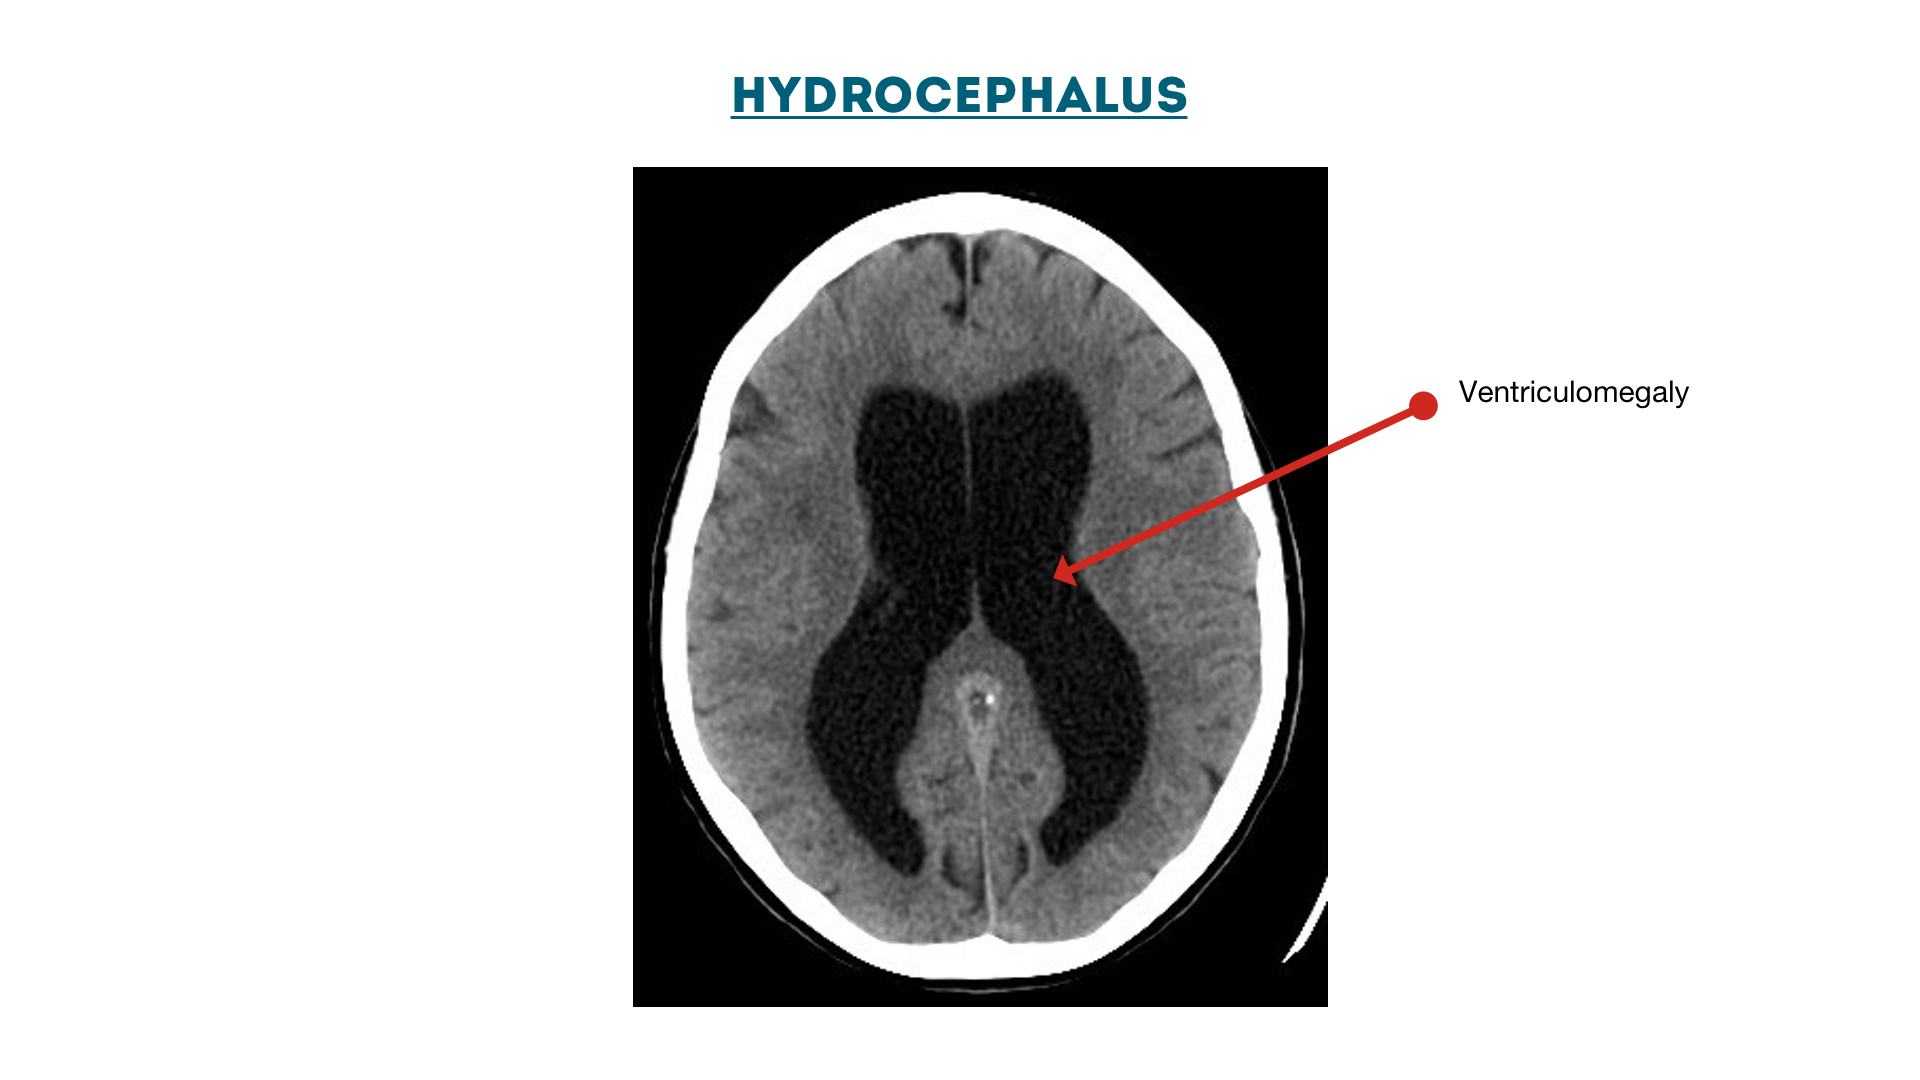 Figure 16 : Hydrocephalus: enlarged ventricles (ventriculomegaly)